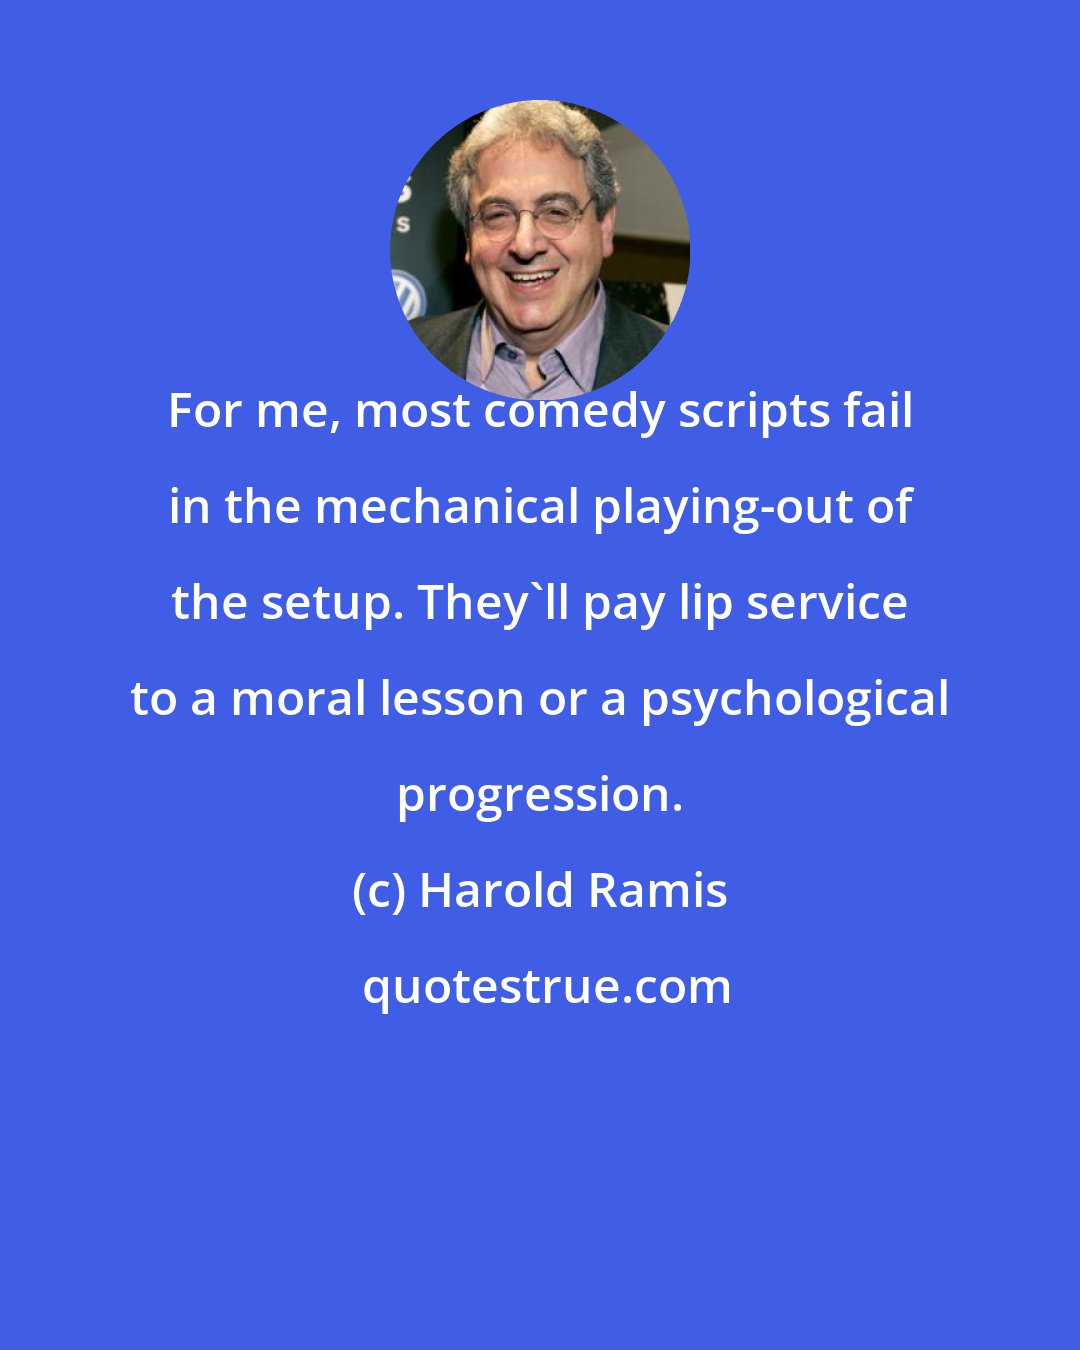 Harold Ramis: For me, most comedy scripts fail in the mechanical playing-out of the setup. They'll pay lip service to a moral lesson or a psychological progression.